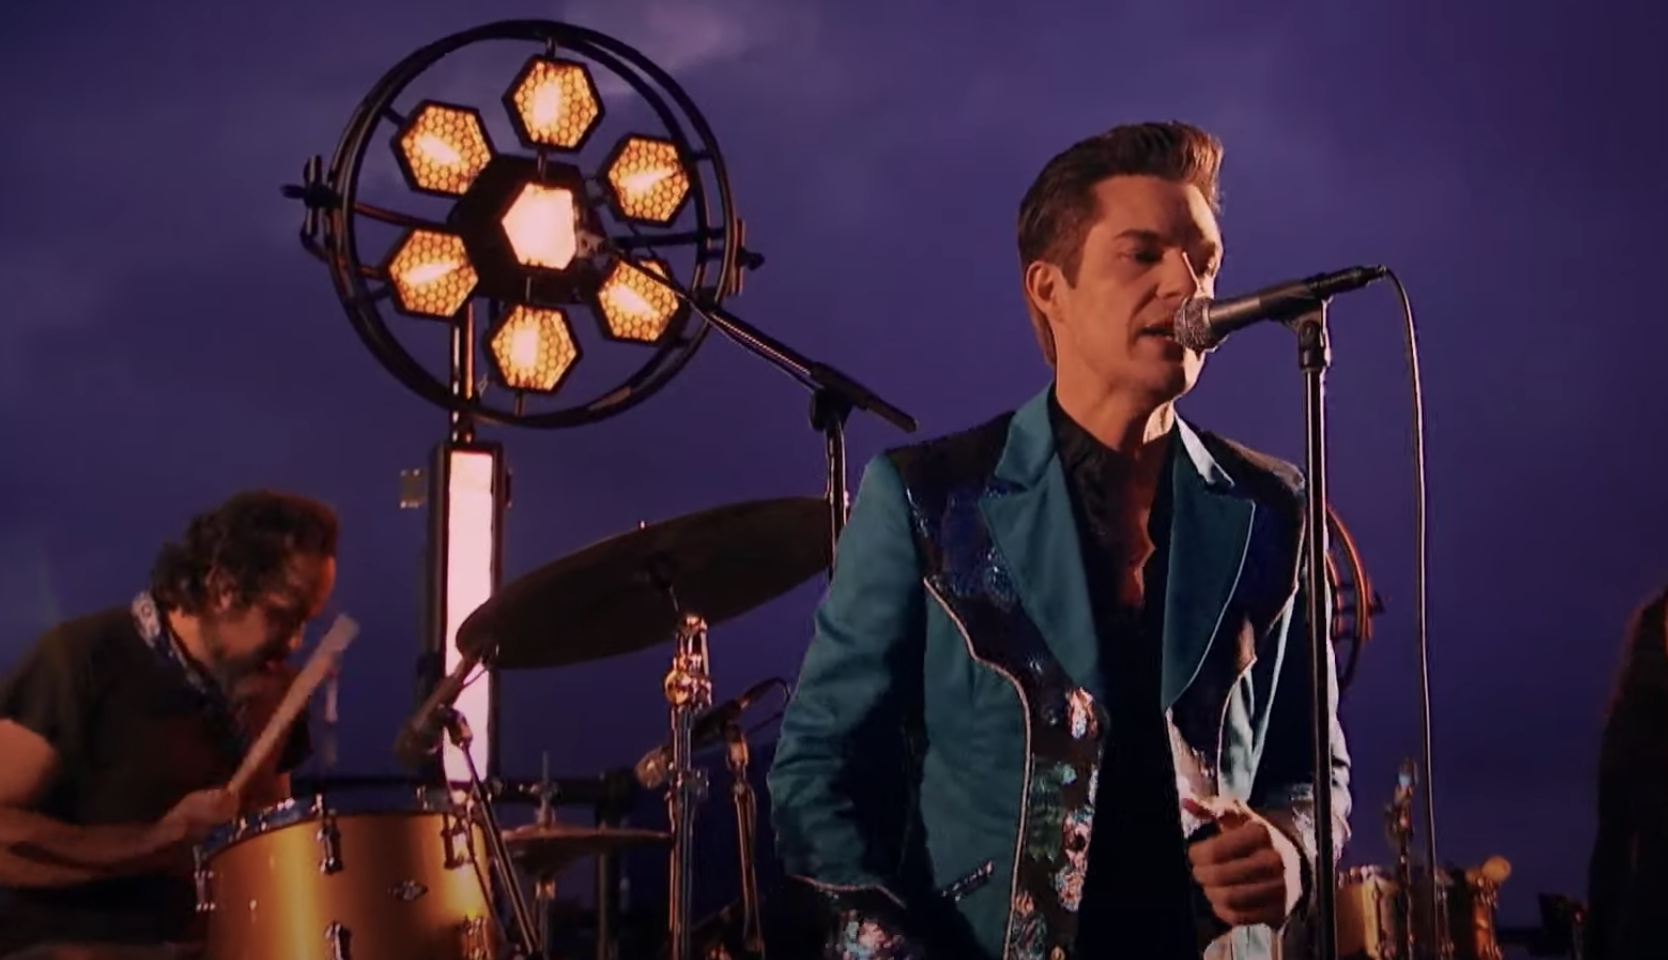 Watch The Killers Perform ‘Dying Breed’ on ‘Fallon’